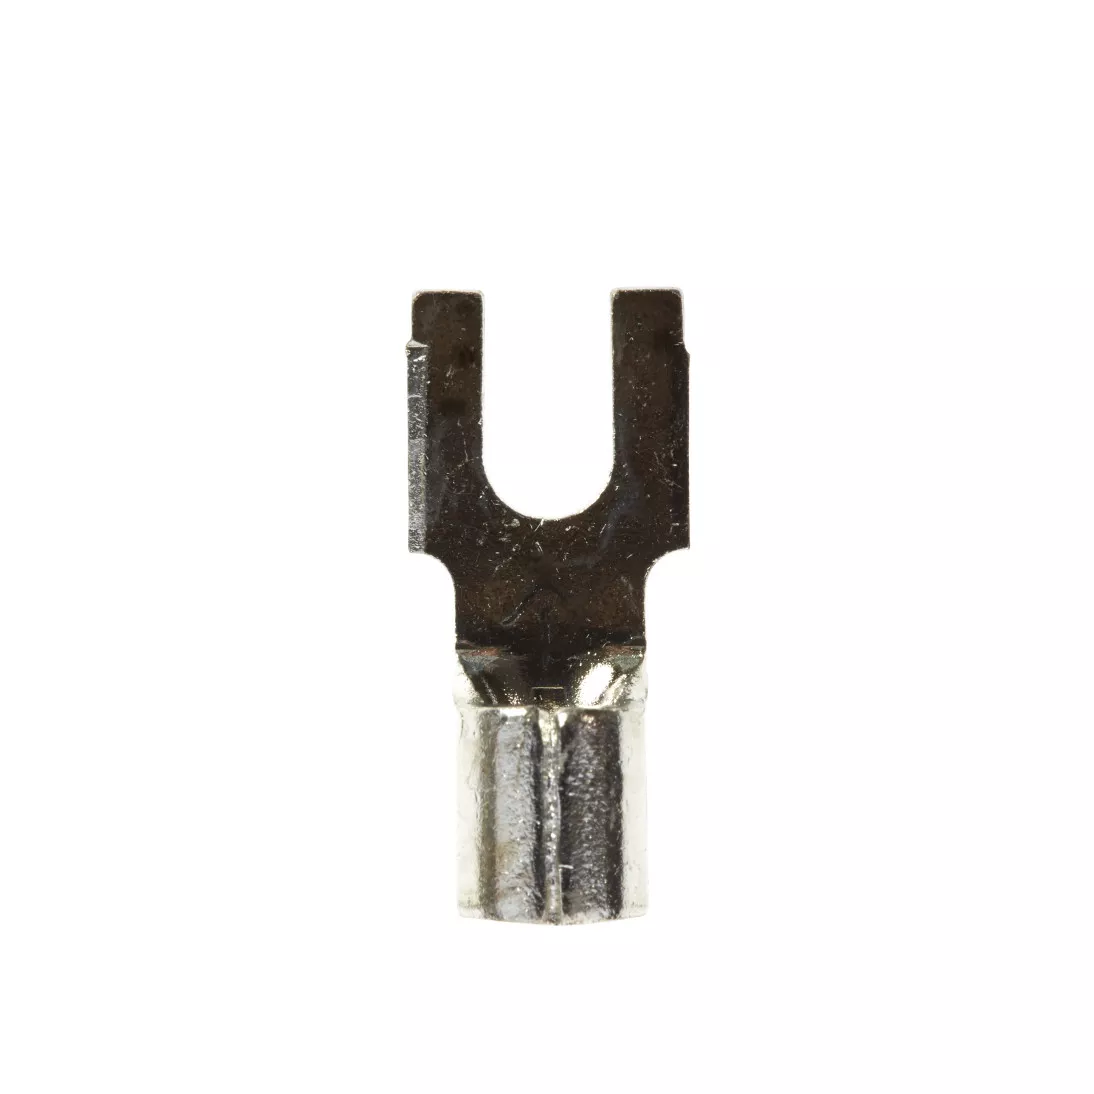 3M™ Scotchlok™ Block Fork, Non-Insulated Brazed Seam M10-6FBK, Stud Size
6, suitable for use in a terminal block, 500/Case